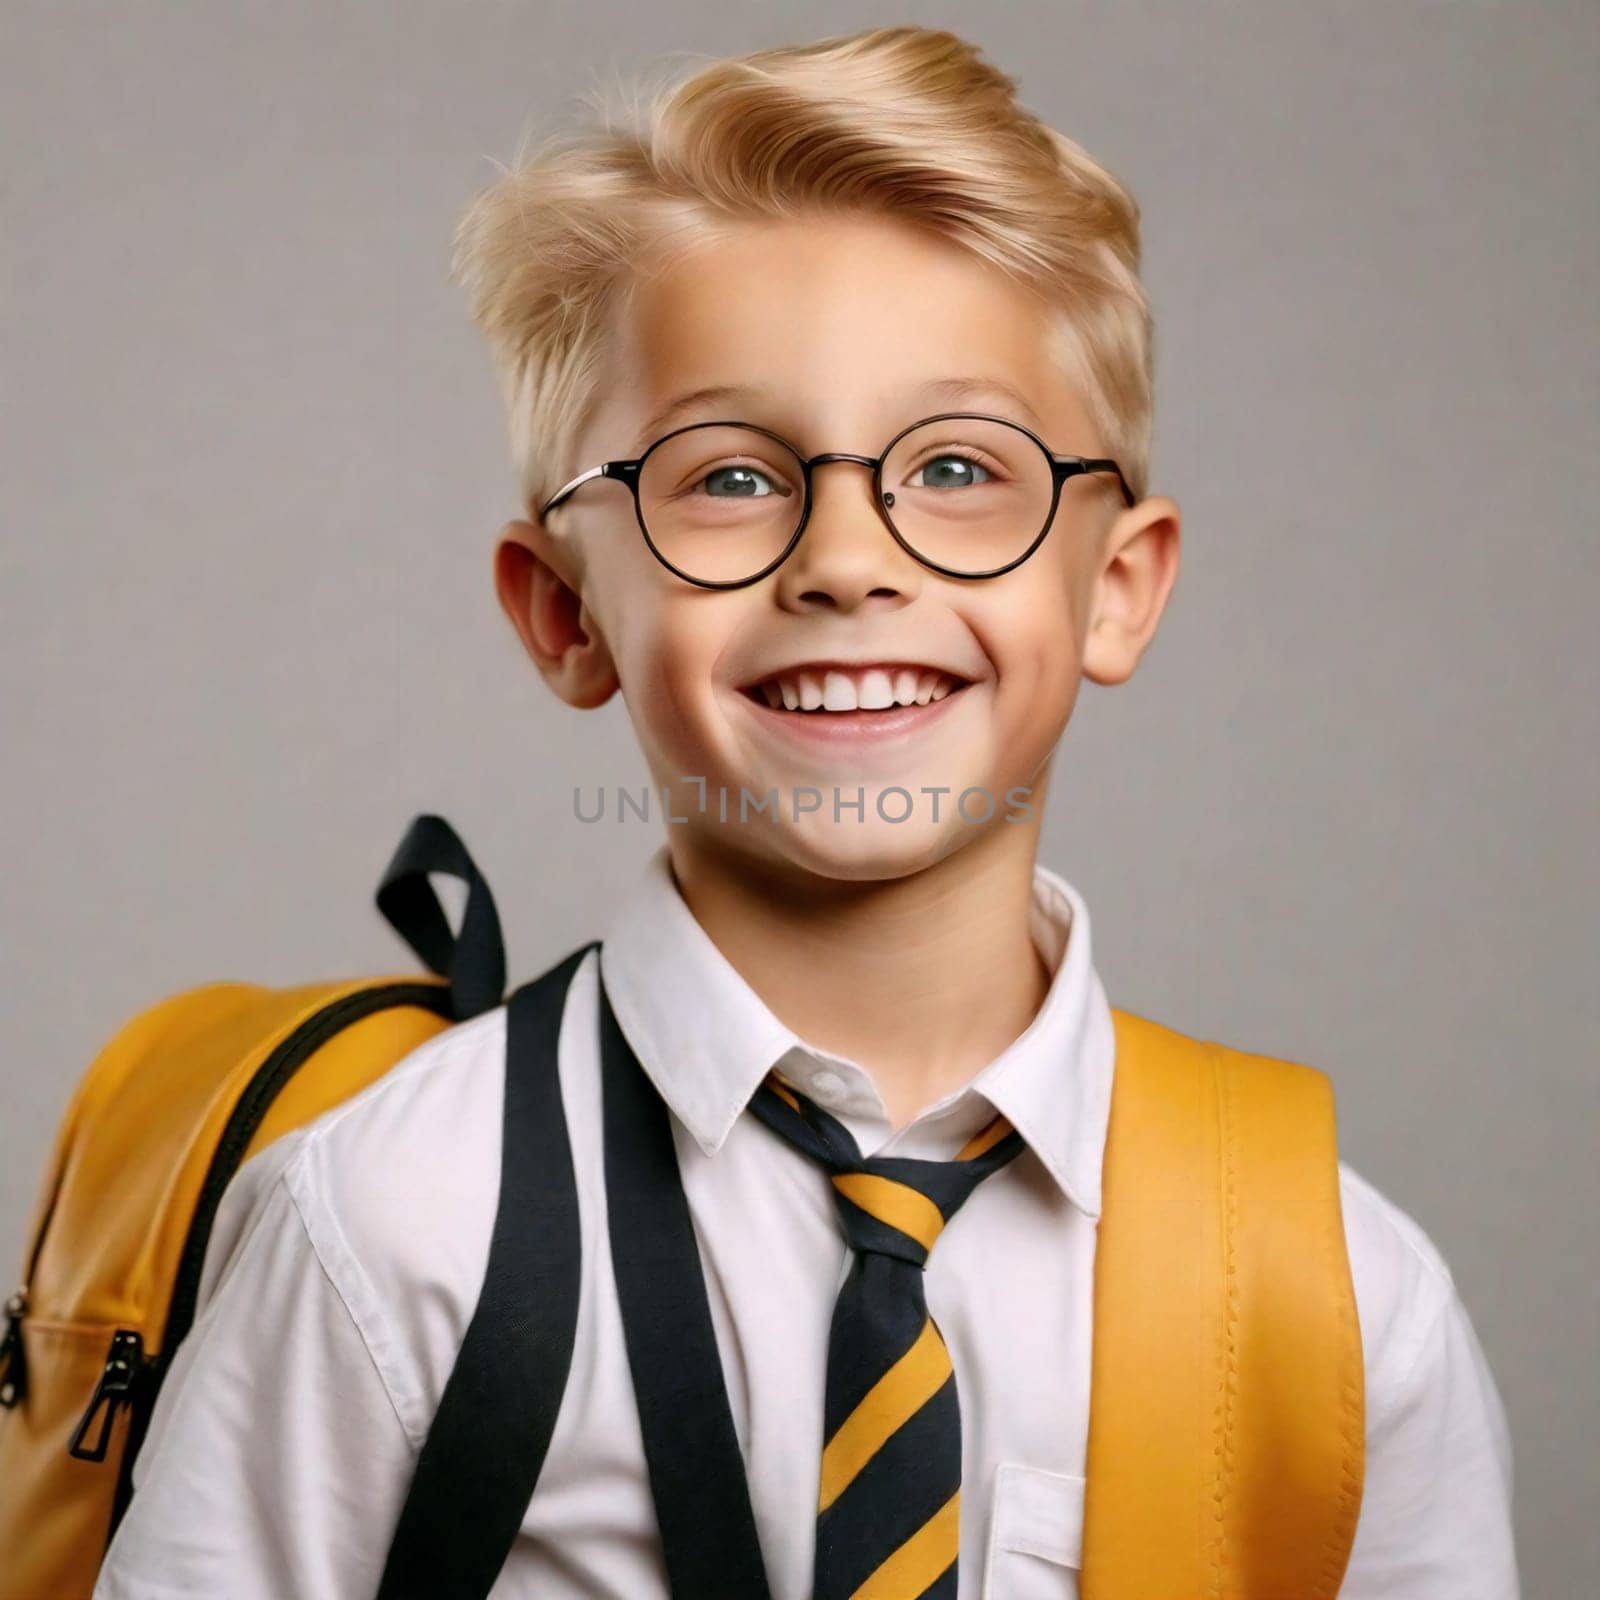 Portrait of a funny smart blond schoolboy with glasses by Севостьянов